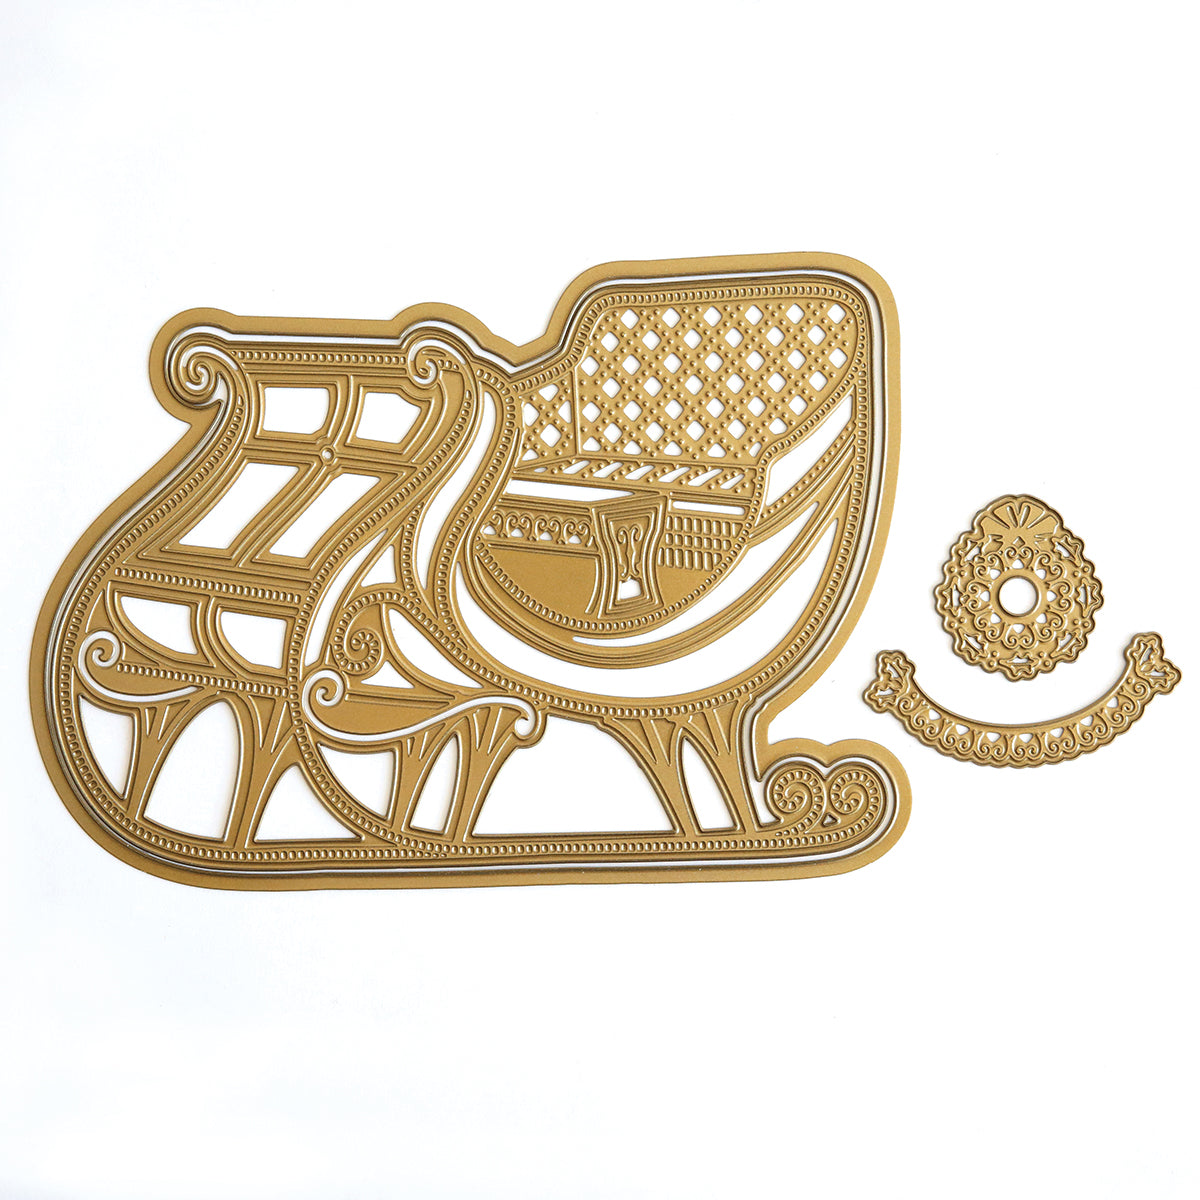 a 3D Sleigh Die and ornaments on a white background.